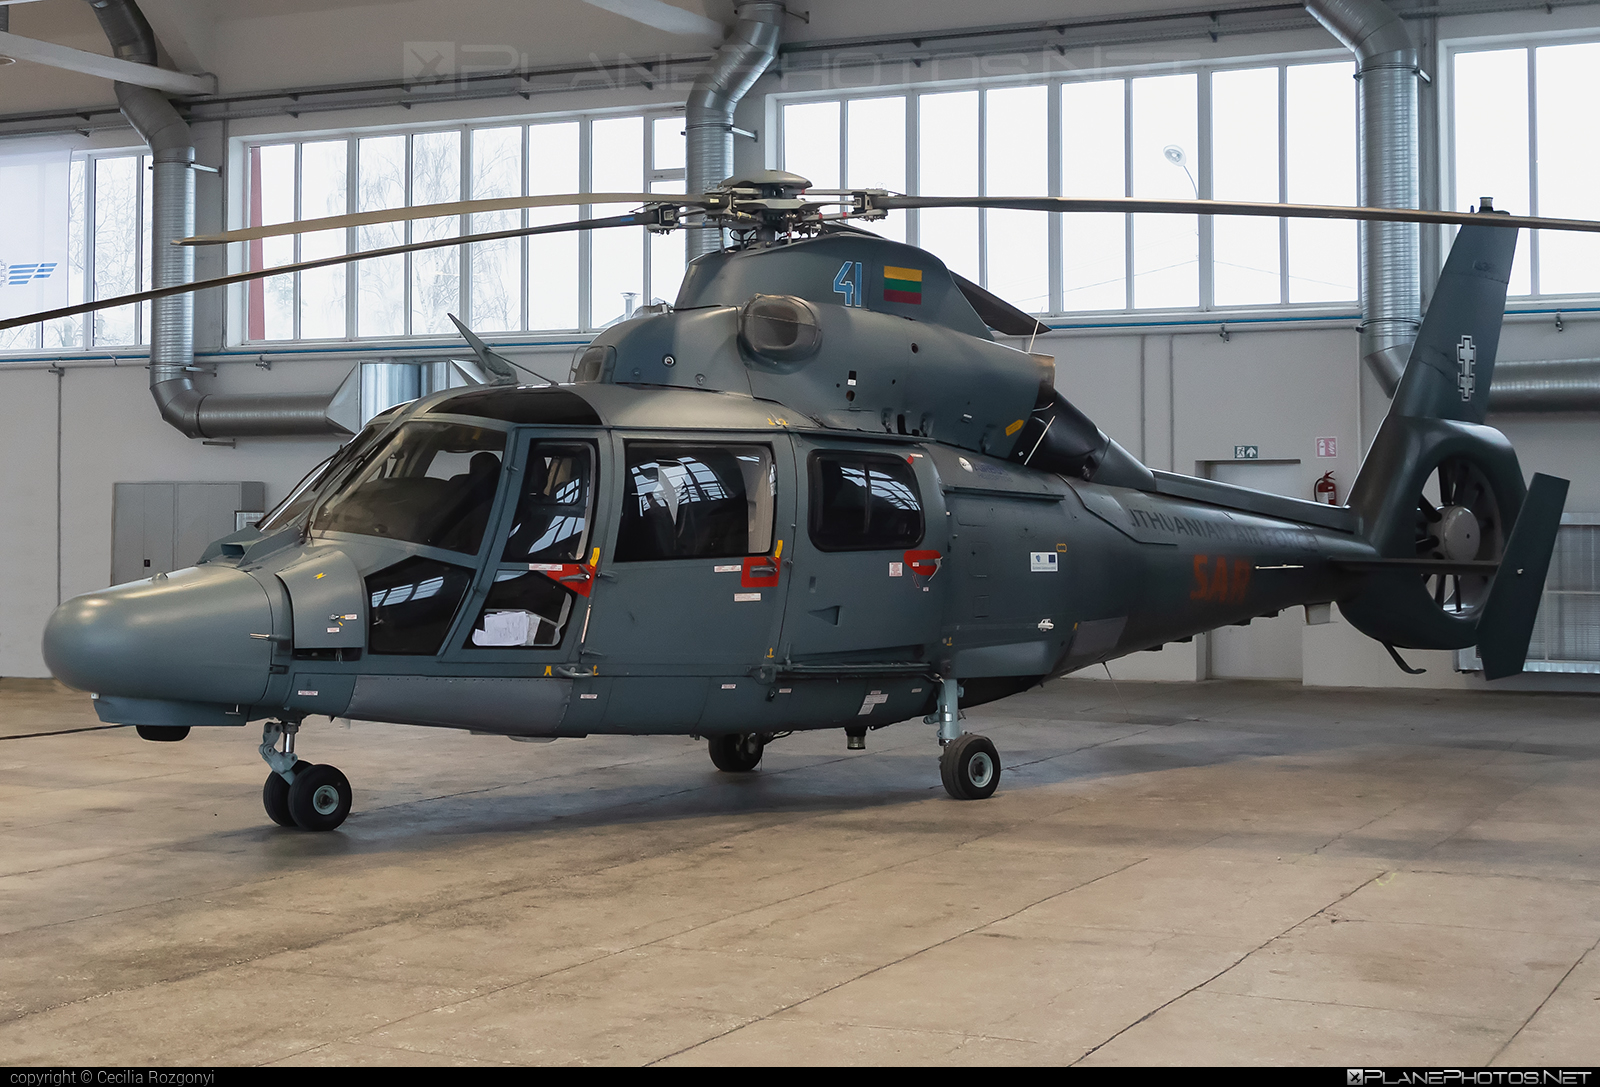 Airbus Helicopters AS365 N3+ Dauphin 2 - 41 operated by Lietuvos karinės oro pajėgos (Lithuanian Air Force) #airbushelicopters